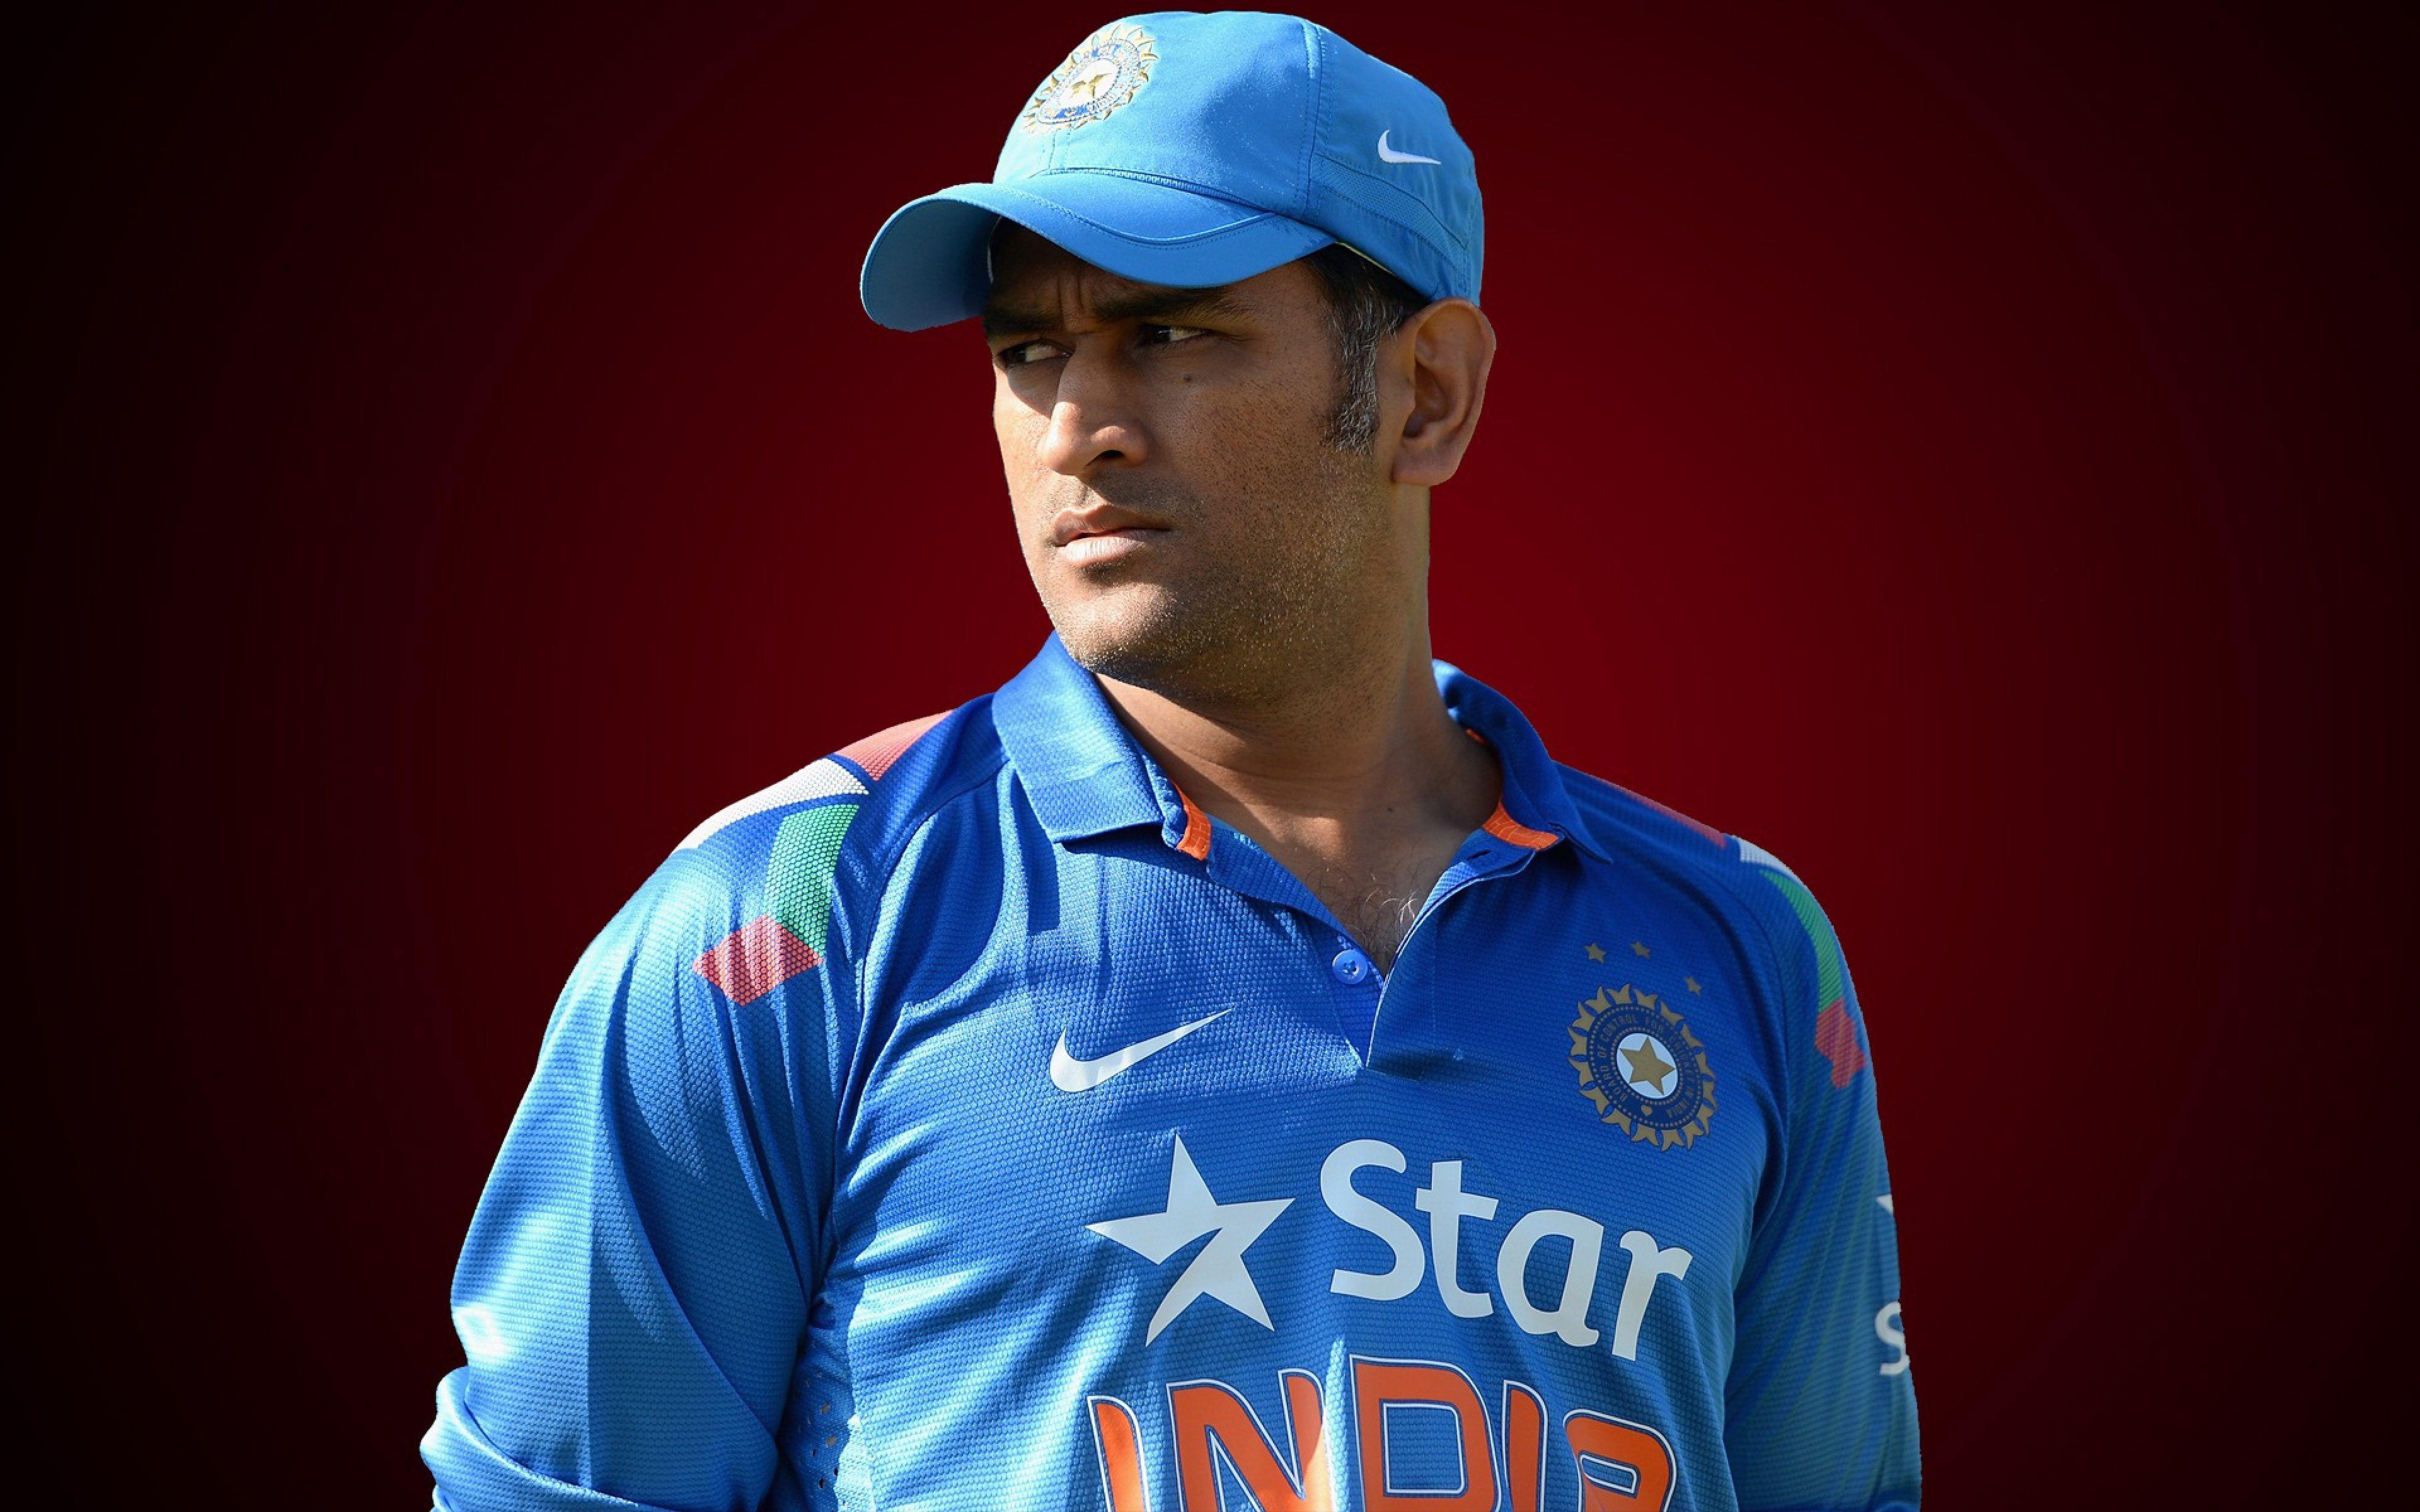 MS Dhoni Wallpapers - Wallpaper Cave